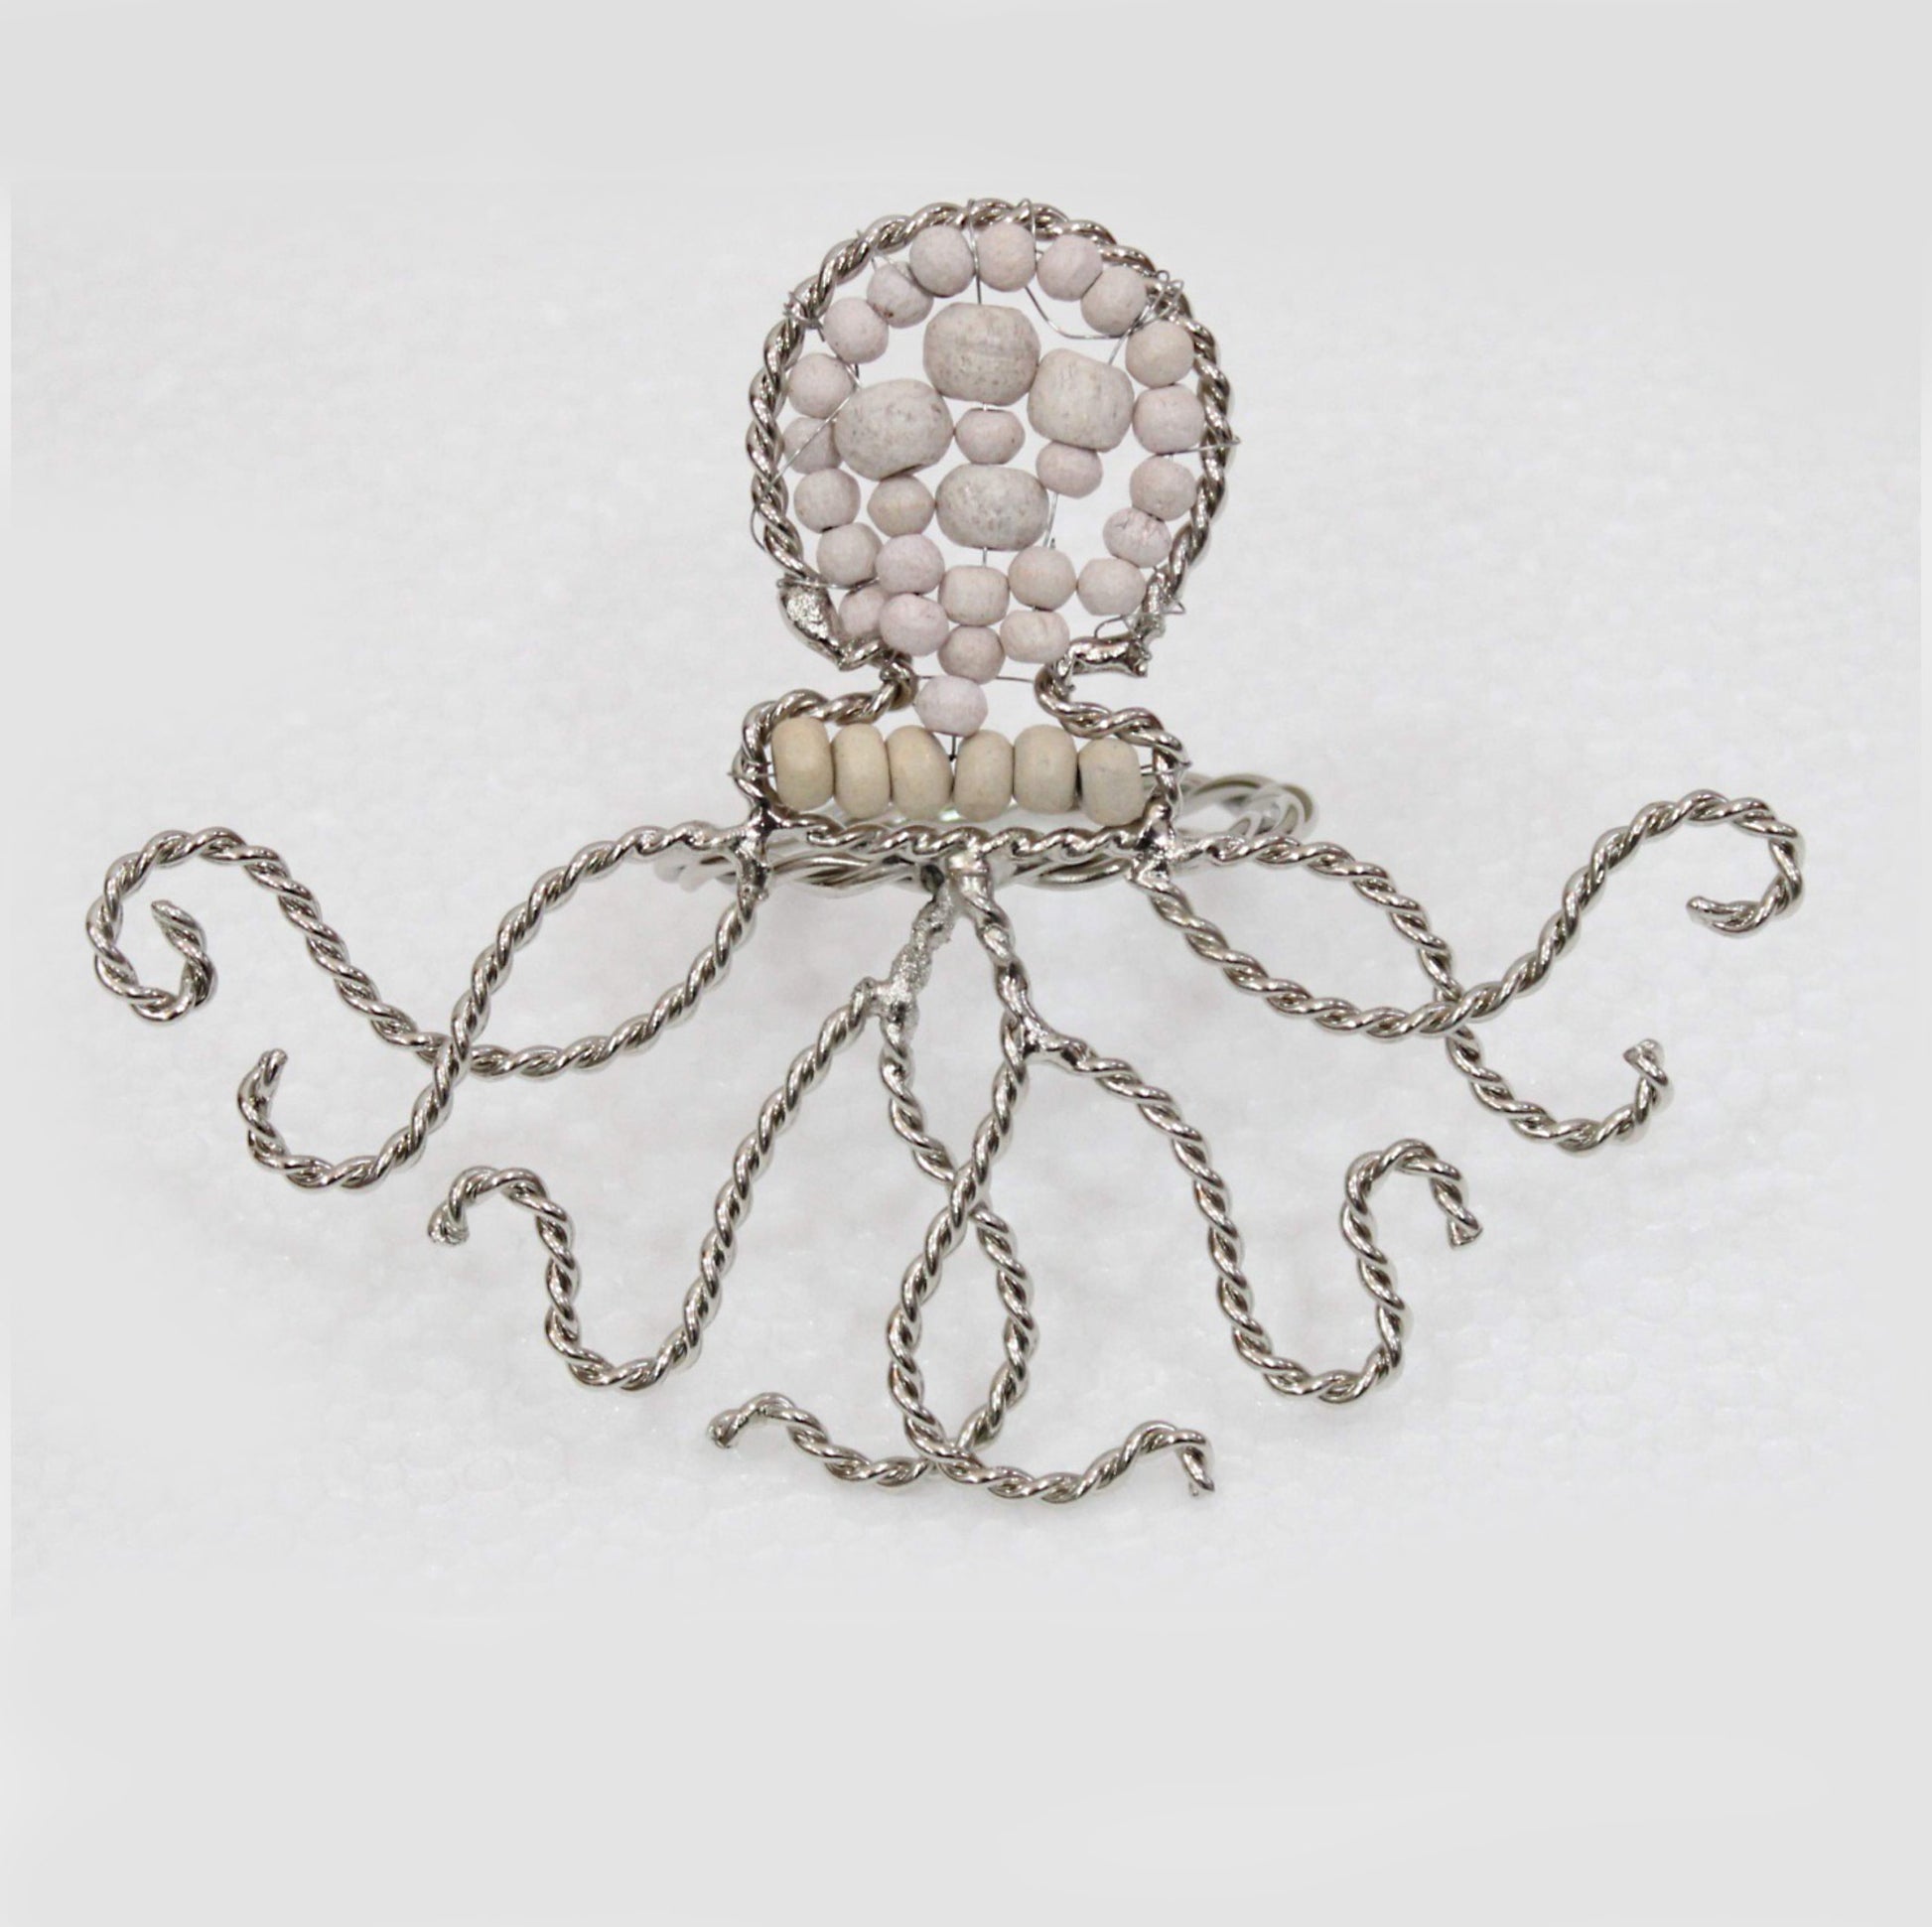 Octopus shaped napkin ring crafted of natural beads.